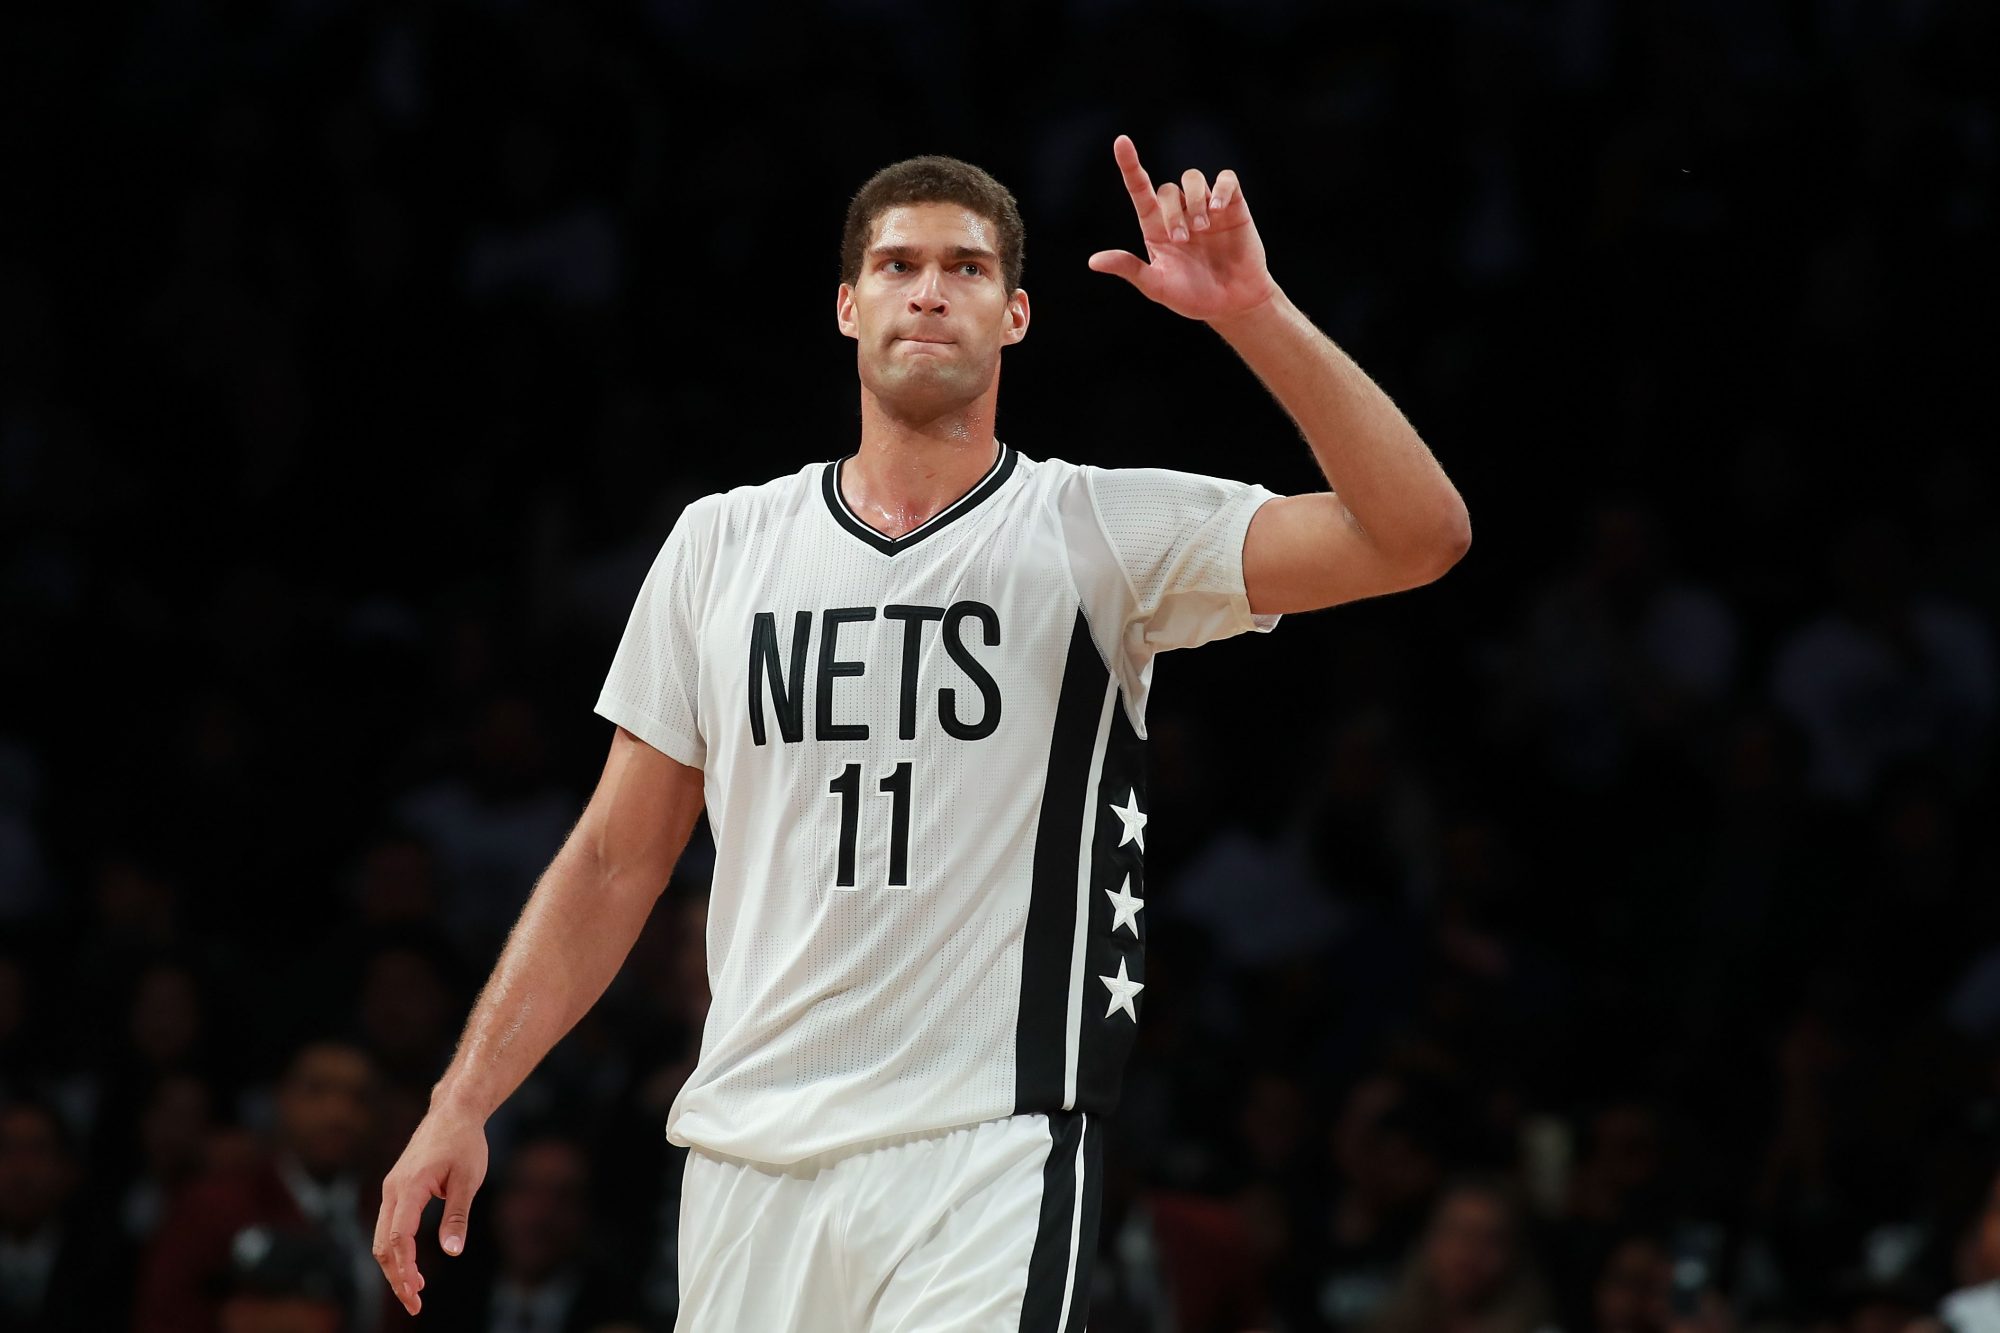 Brooklyn Nets: Retiring Brook Lopez's number 11 is a no brainer